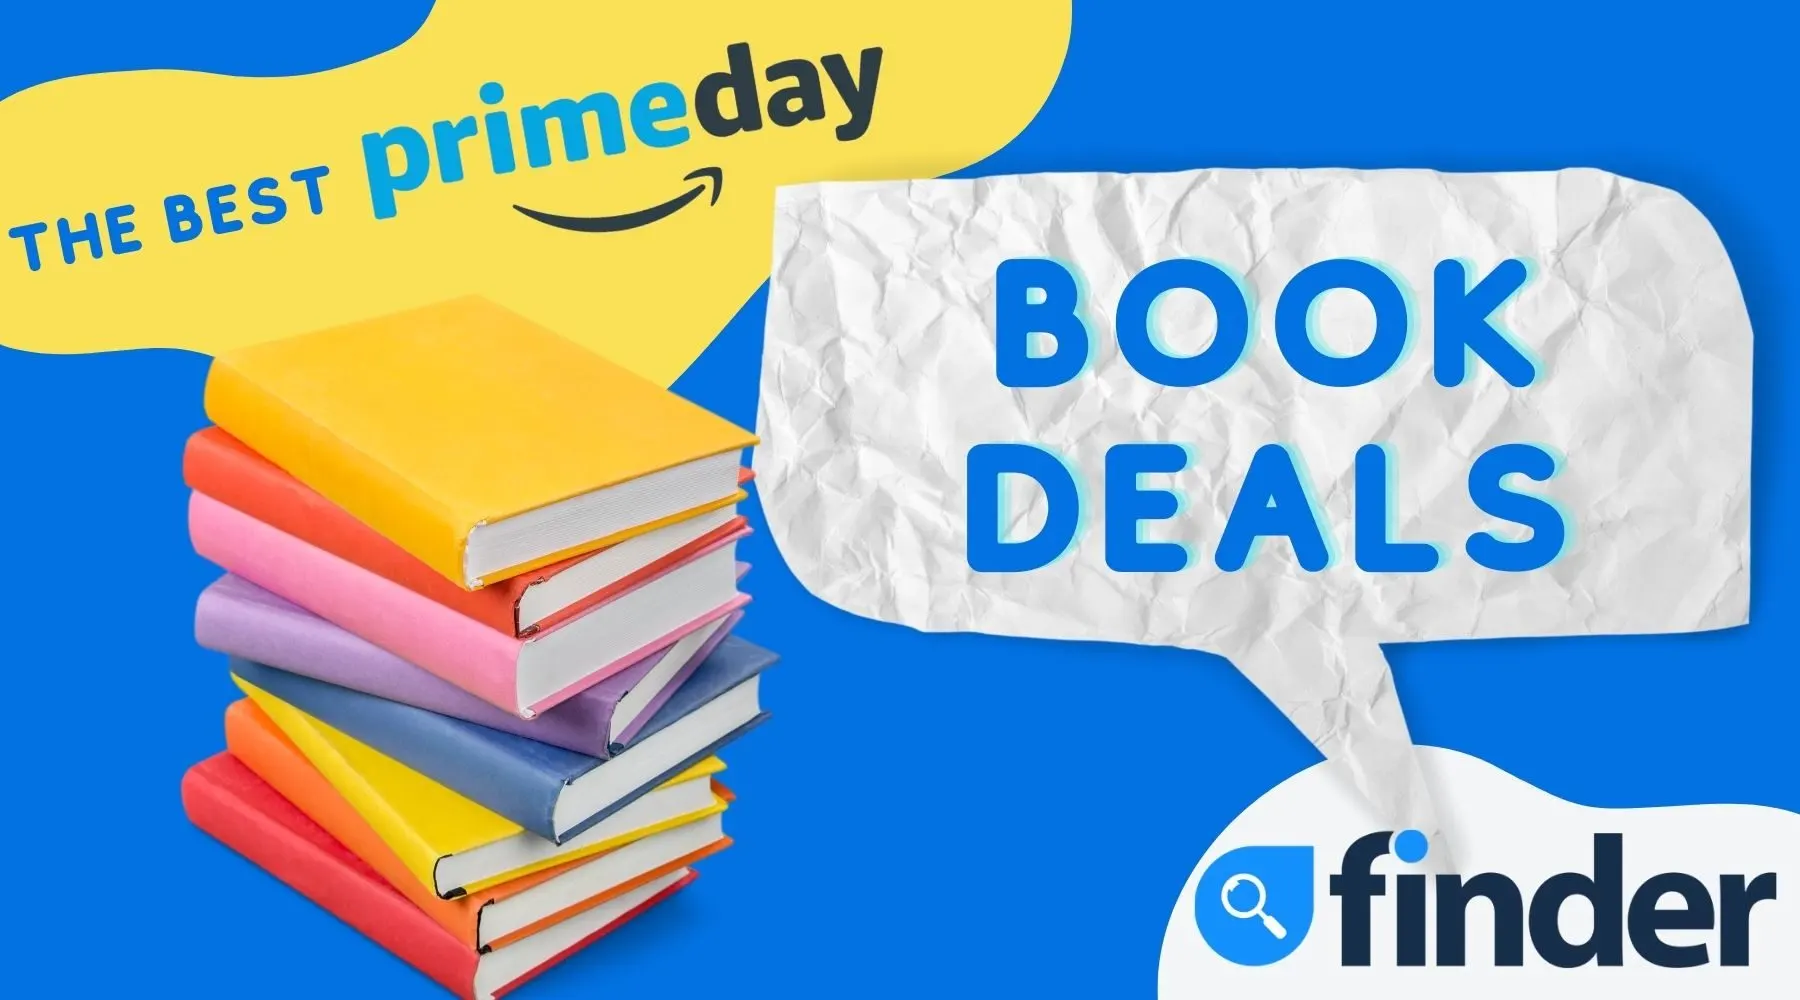 Amazon Prime Day book deals: Our top picks for all ages